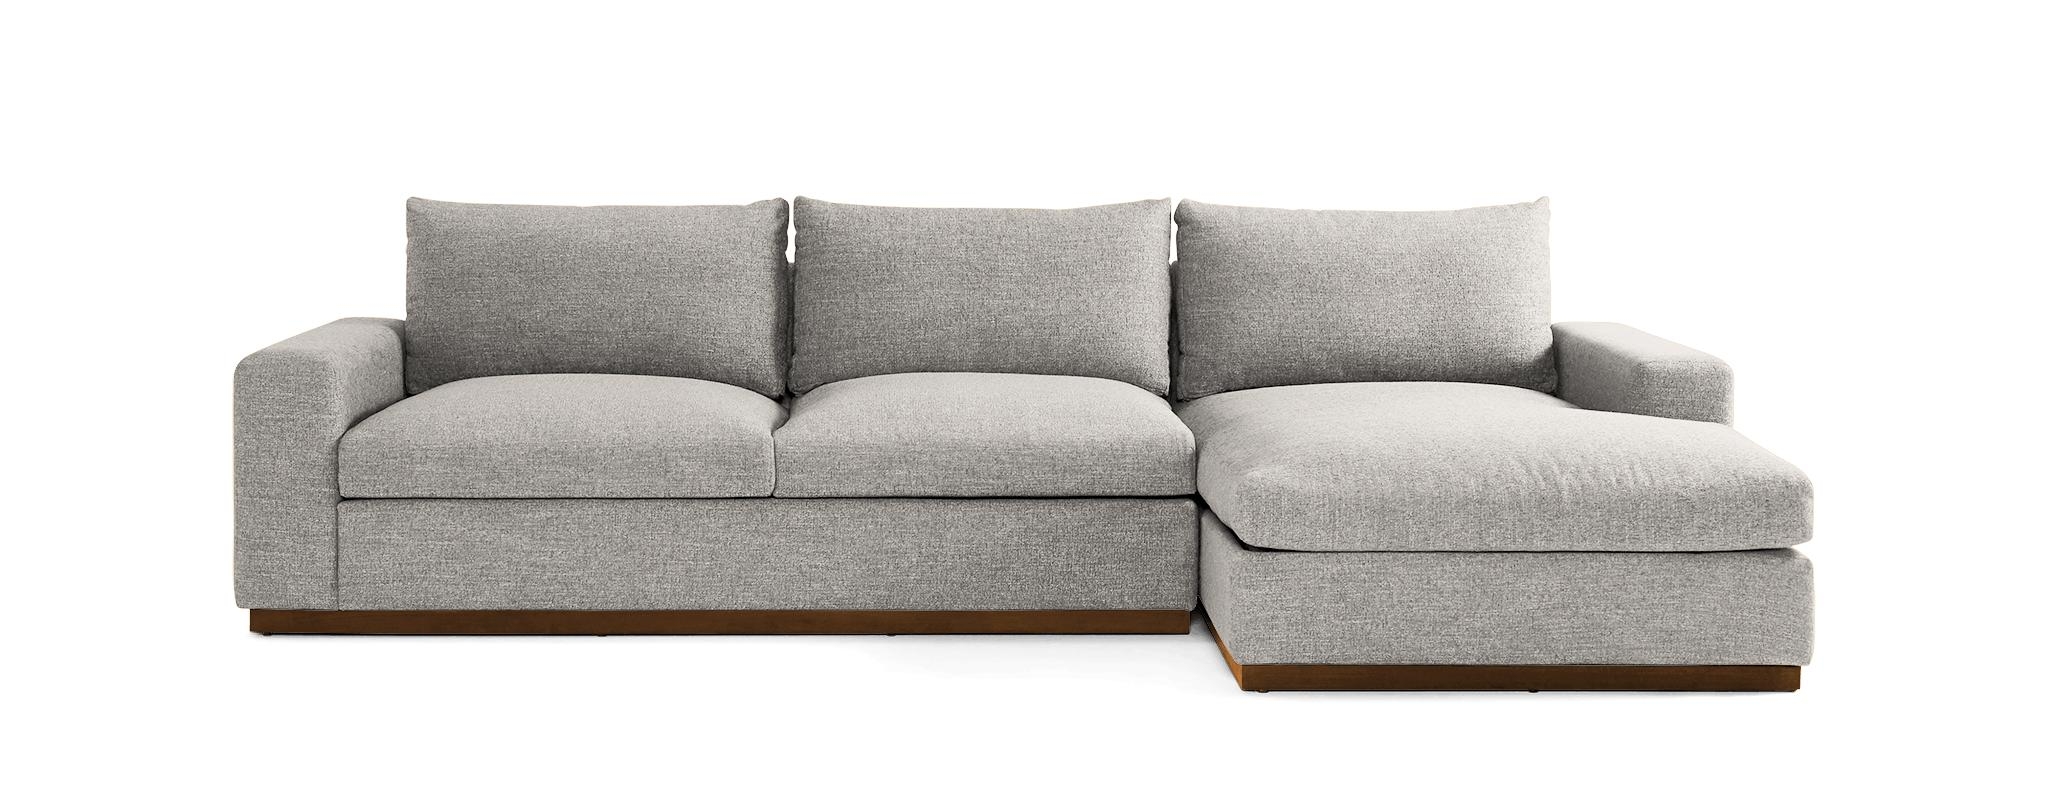 Beige/White Holt Mid Century Modern Sectional with Storage - Merit Dove - Mocha - Right - Image 0